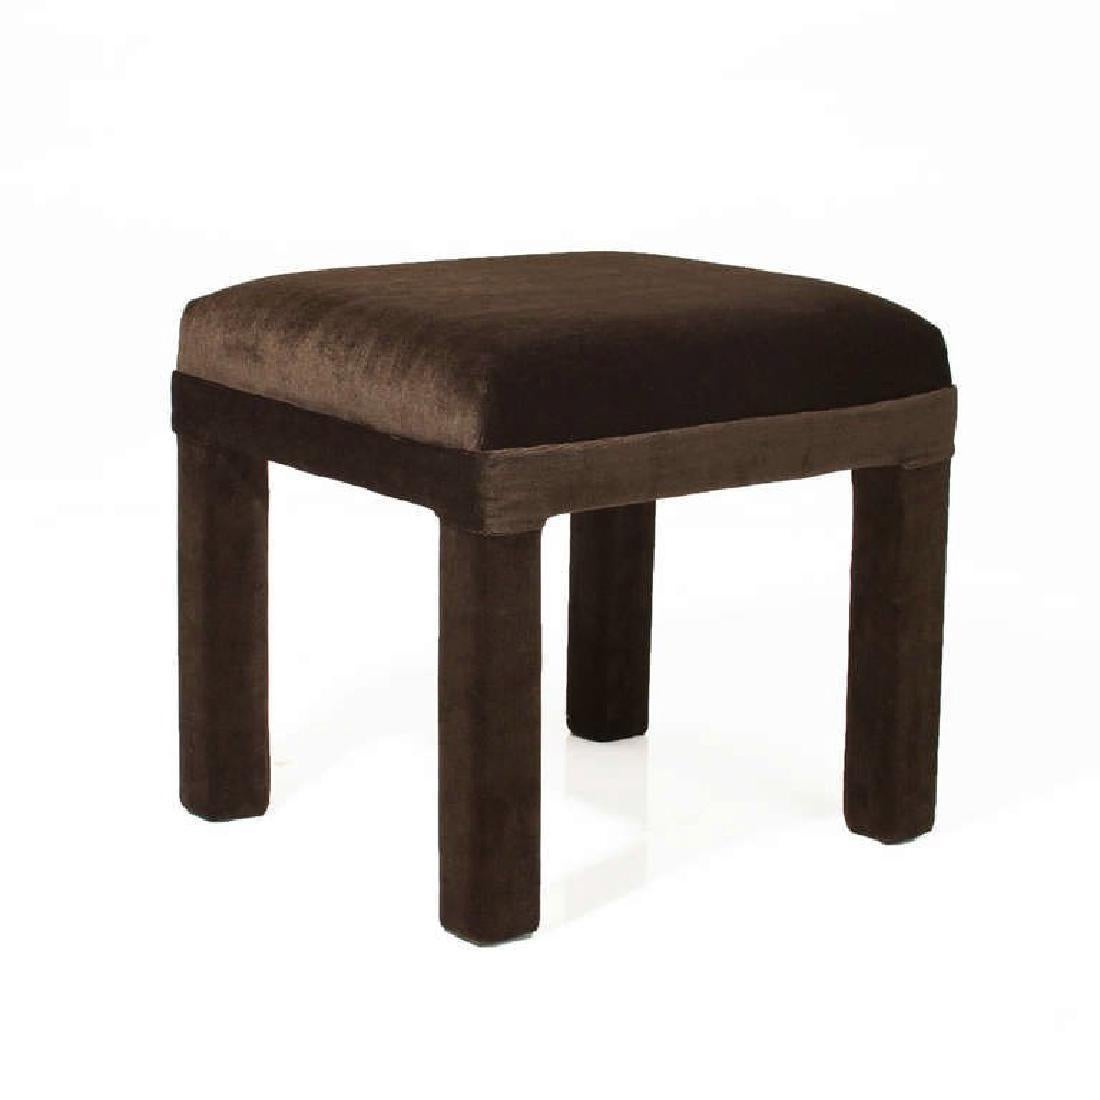 Stunning, sculptural and elegant mohair stool in a deep sorrel hue. c. 1960's. 

This is an Otto Binx Year-end Clearance Sale Listing. The final Markdown price listed here is per item and firm. First come, first served. No holds. clearance items